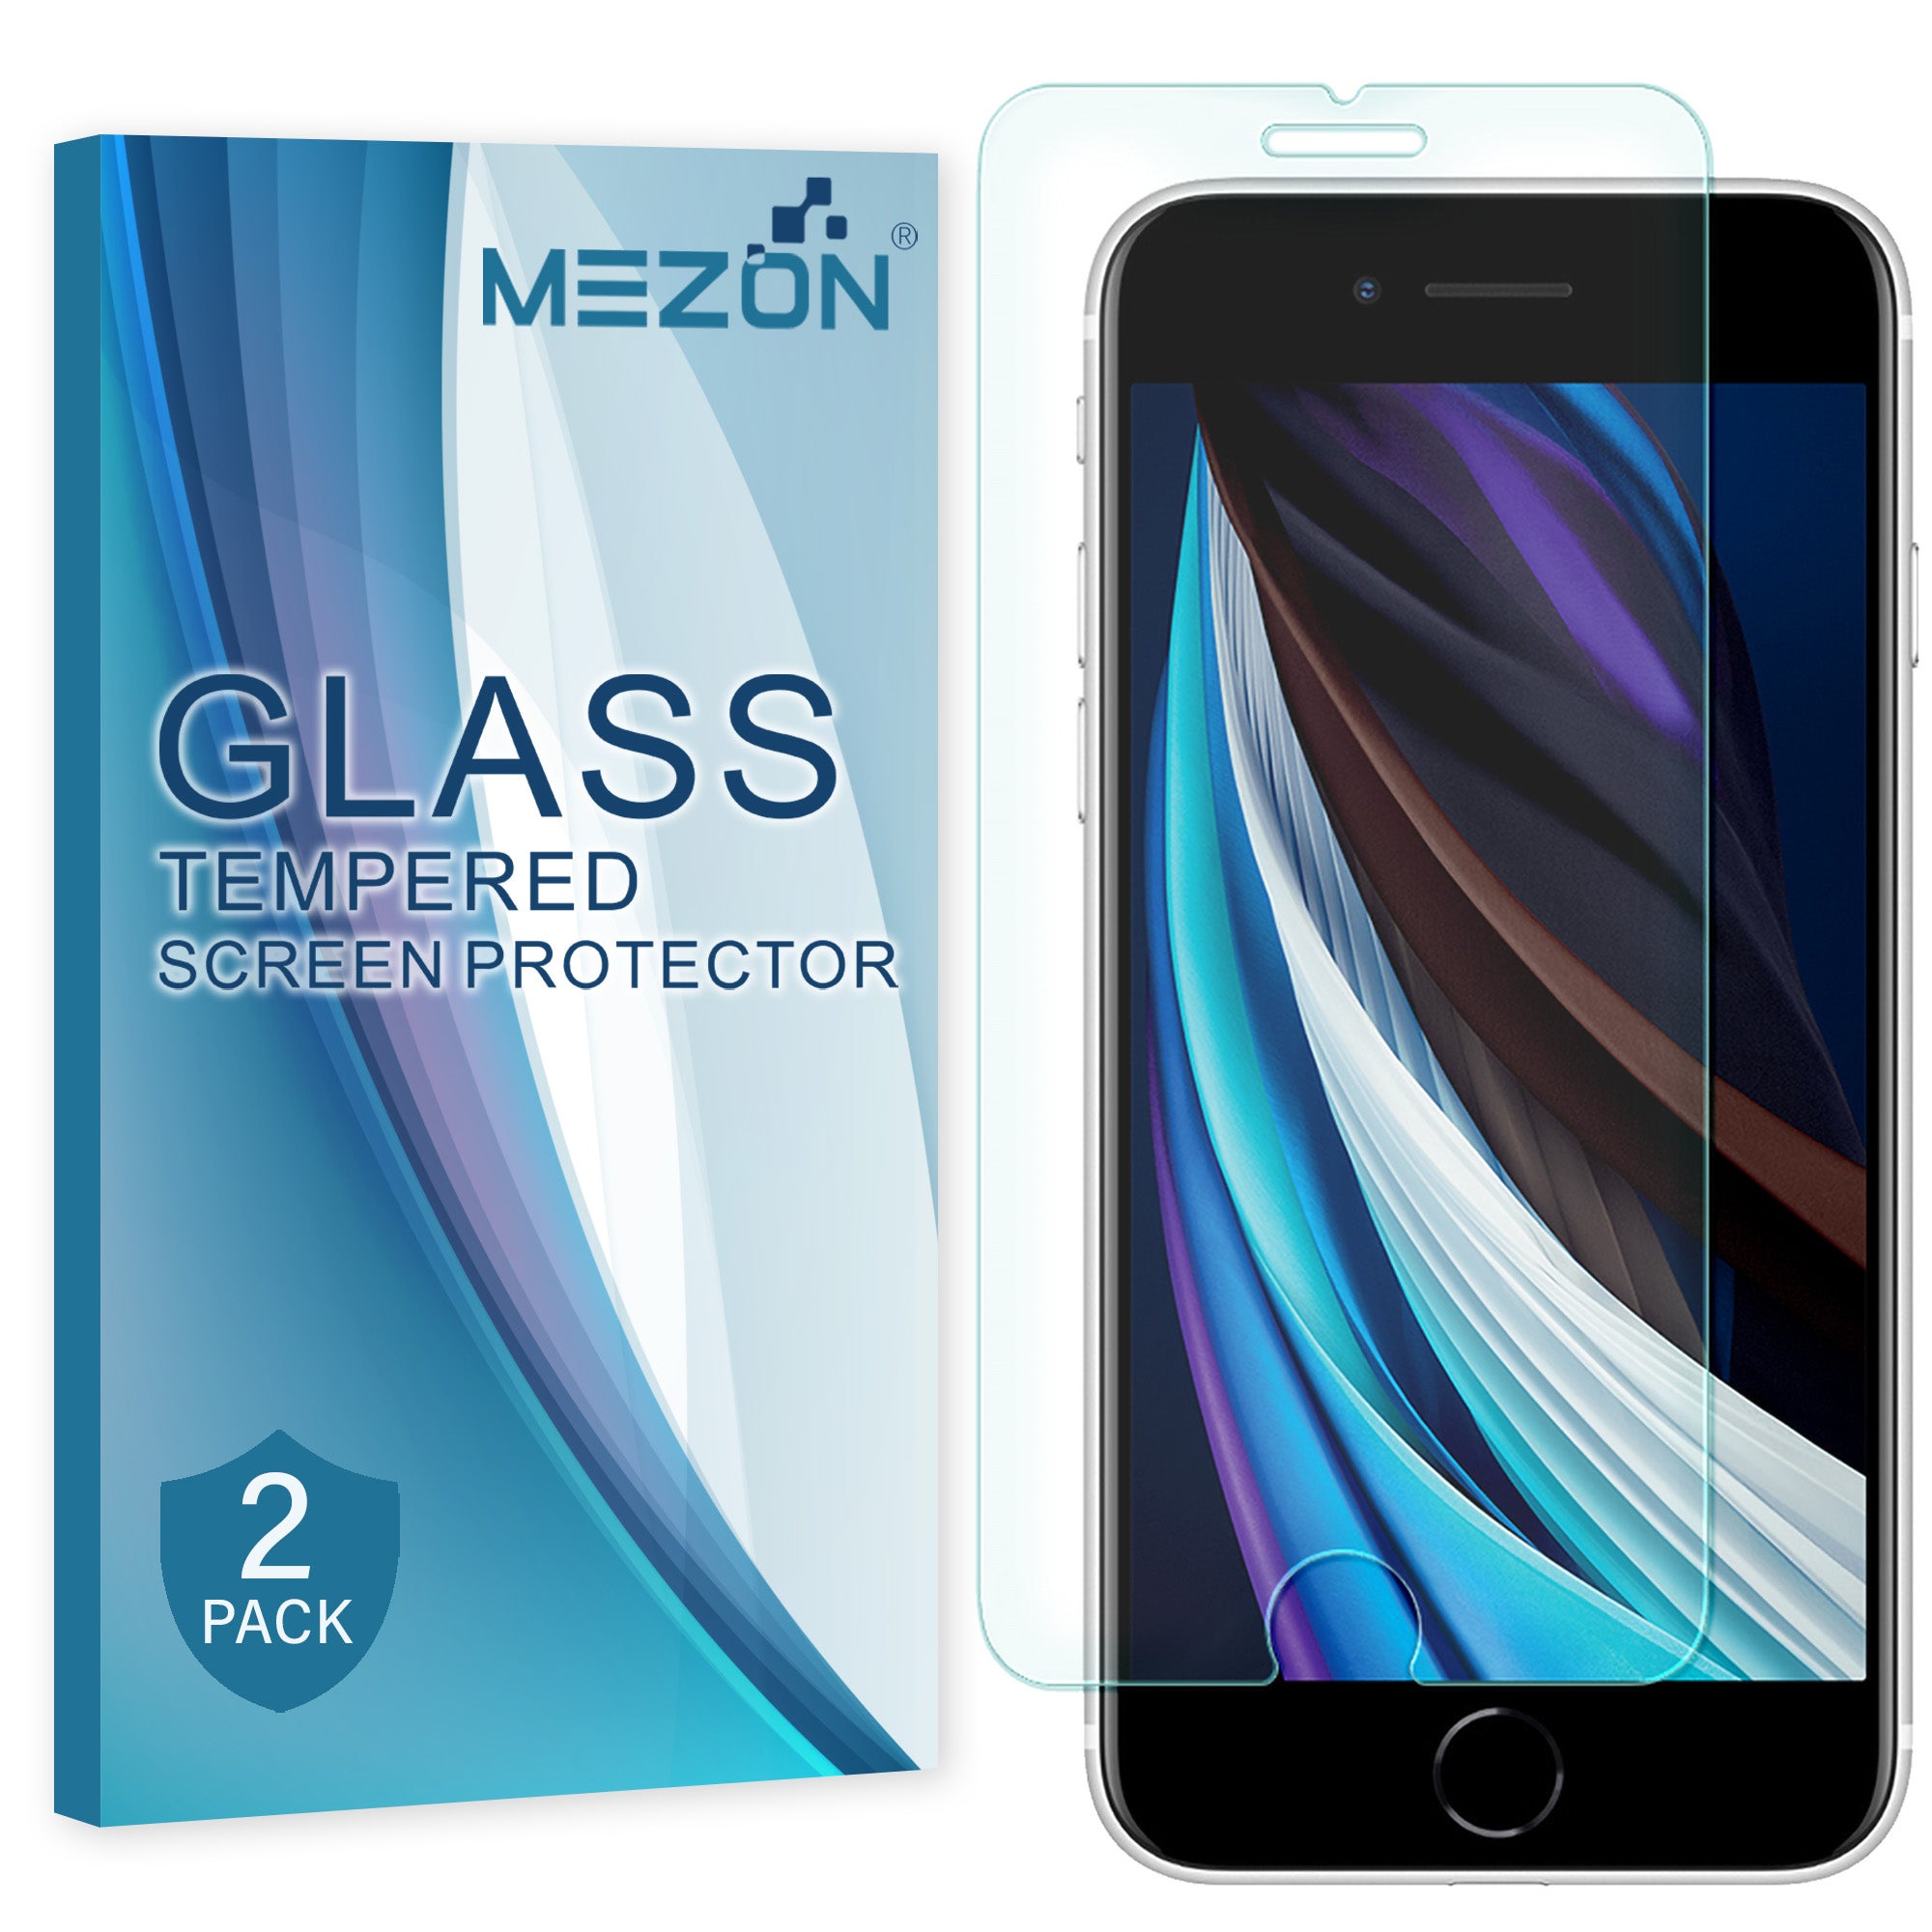 [2 Pack] Apple iPhone 8 (4.7”) Tempered Glass Crystal Clear Premium 9H HD Screen Protector by MEZON – Case Friendly, Shock Absorption (iPhone 8, 9H)